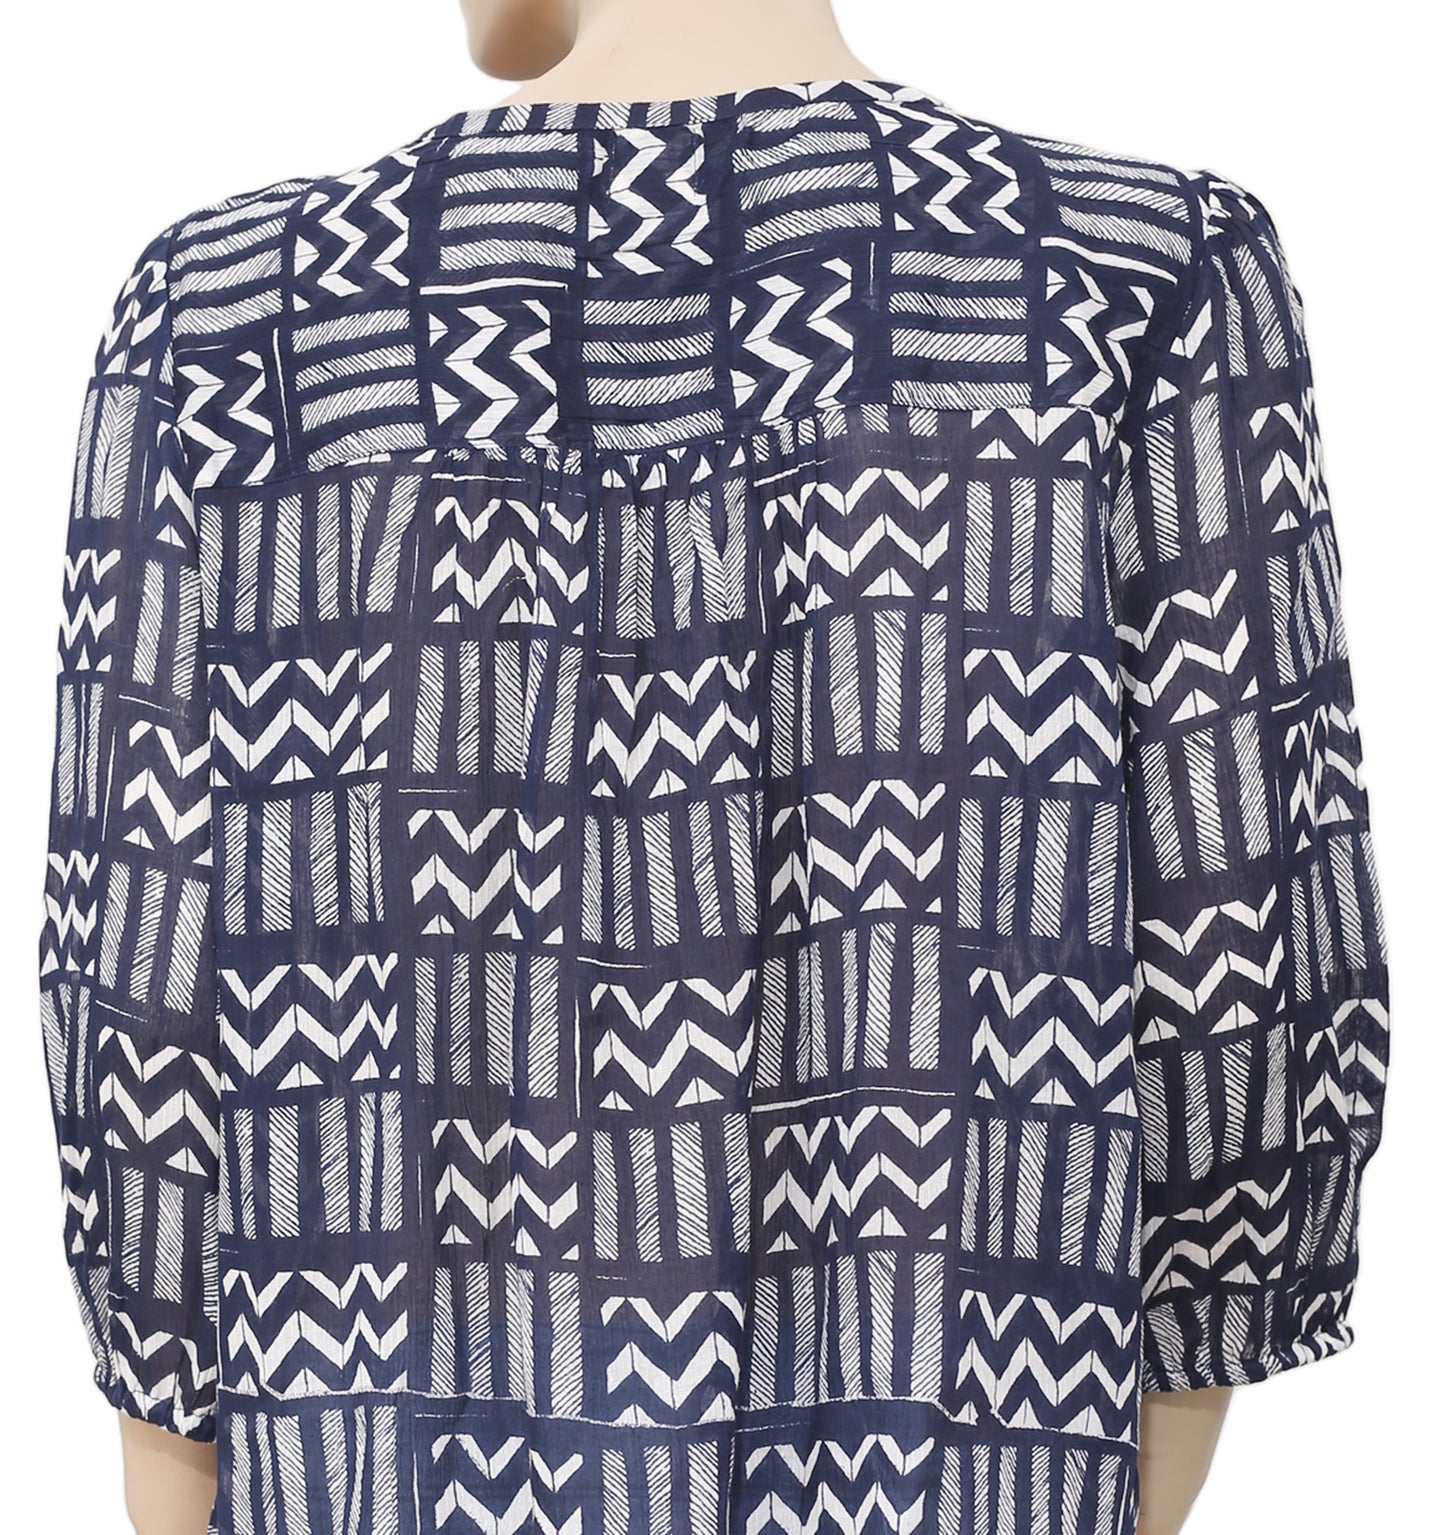 Lucky Brand Printed Buttondown Blouse Top